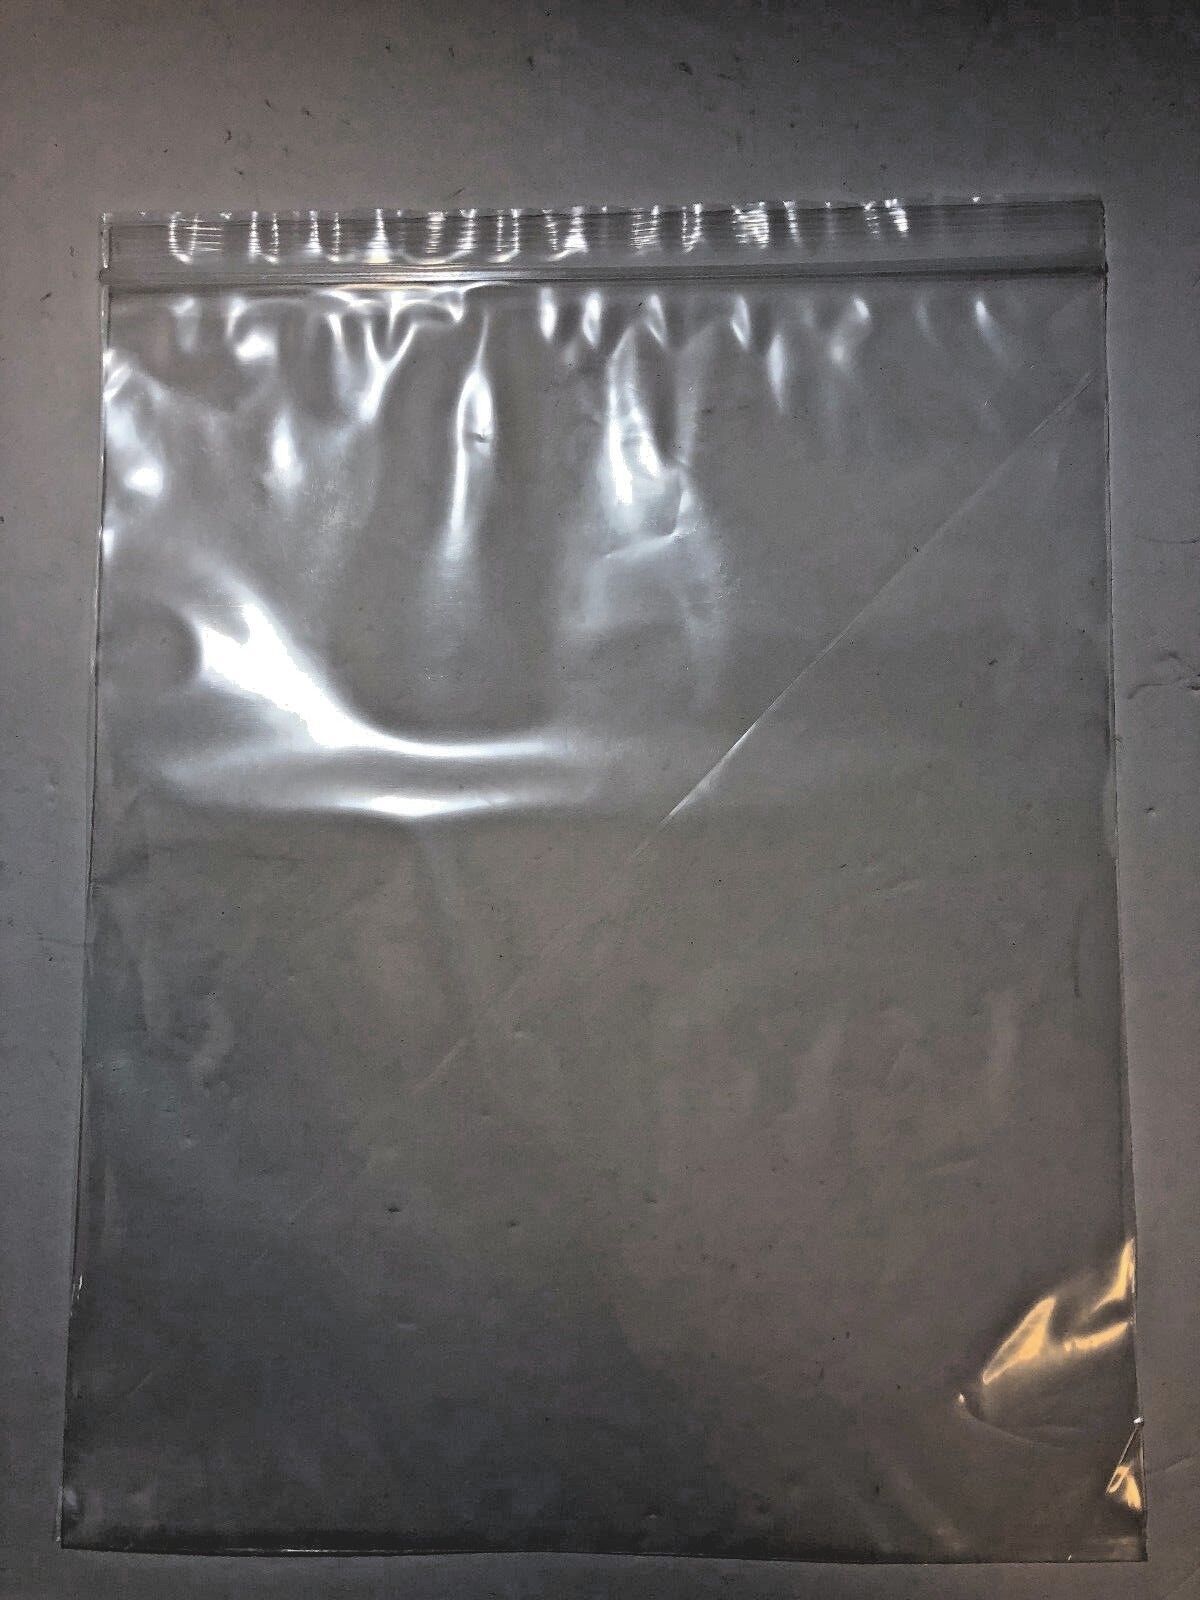 9 x 12 in 4 Mil Clear Plastic Resealable Reclosable Zip Sealing Top Close Bag